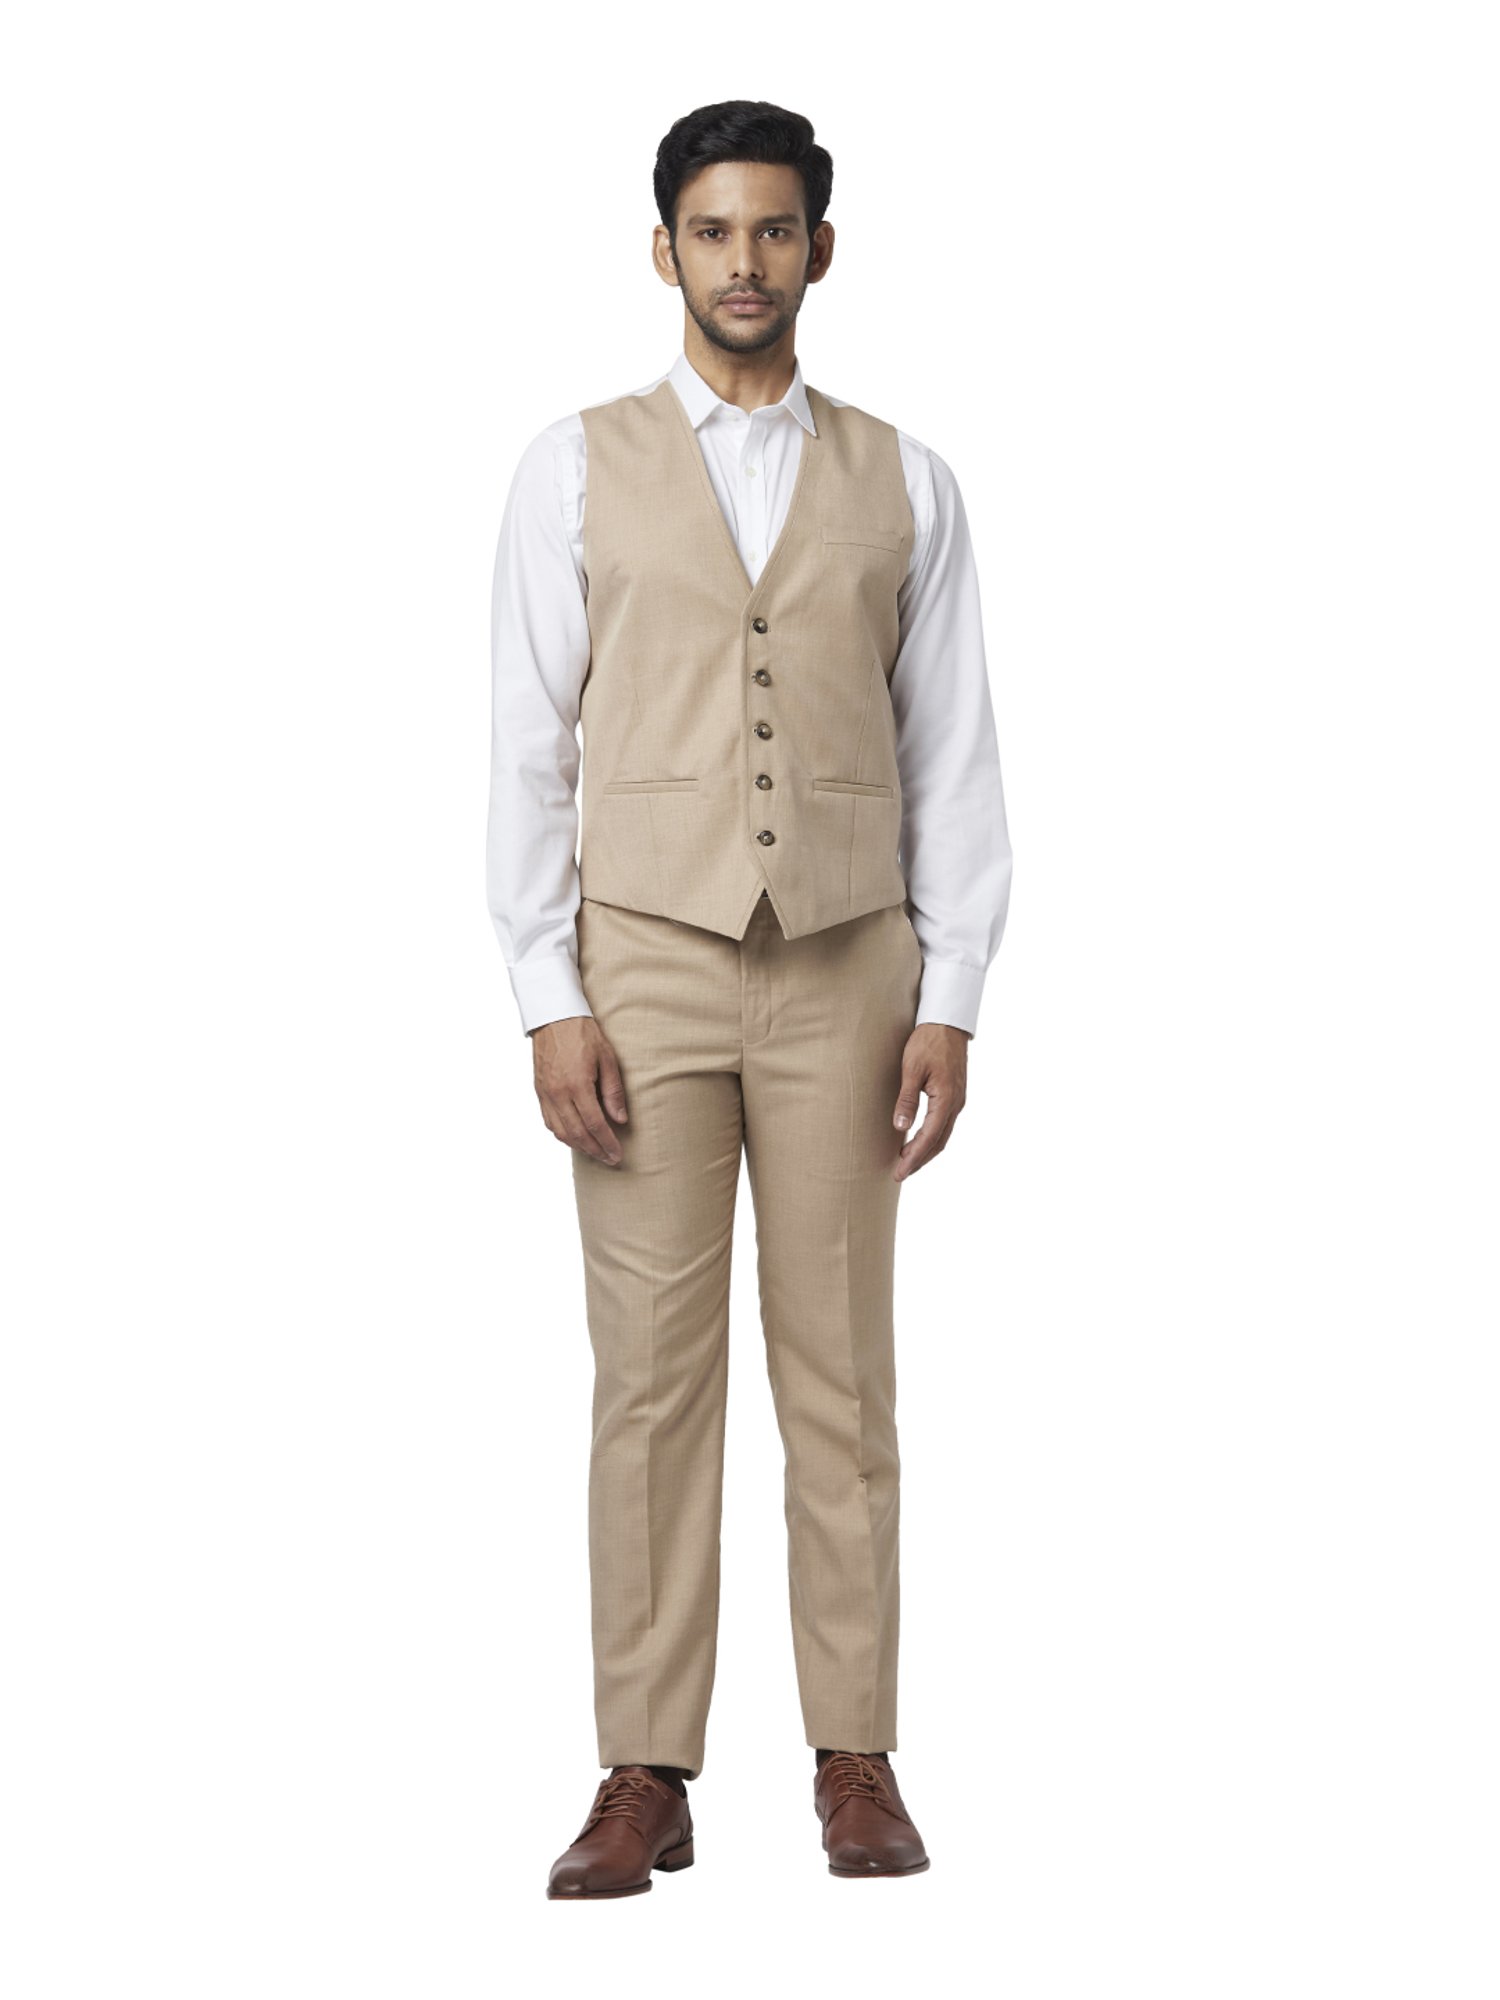 Mens Waistcoats  Vests  What They Are  How To Wear Them